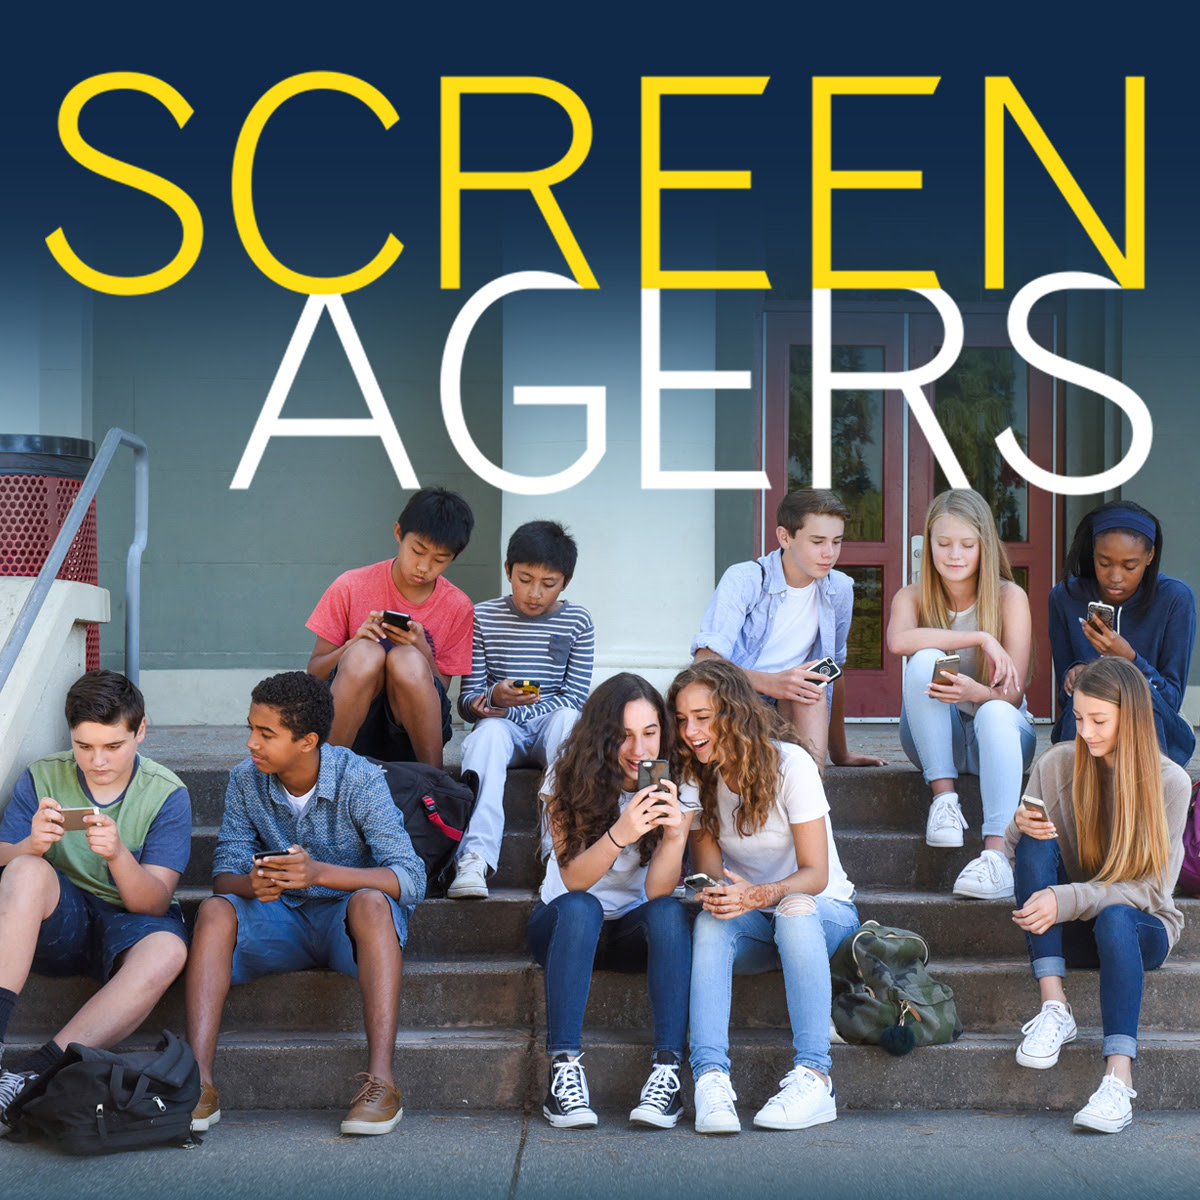 Screenagers Film Presented By Parkville Middle School PTSO